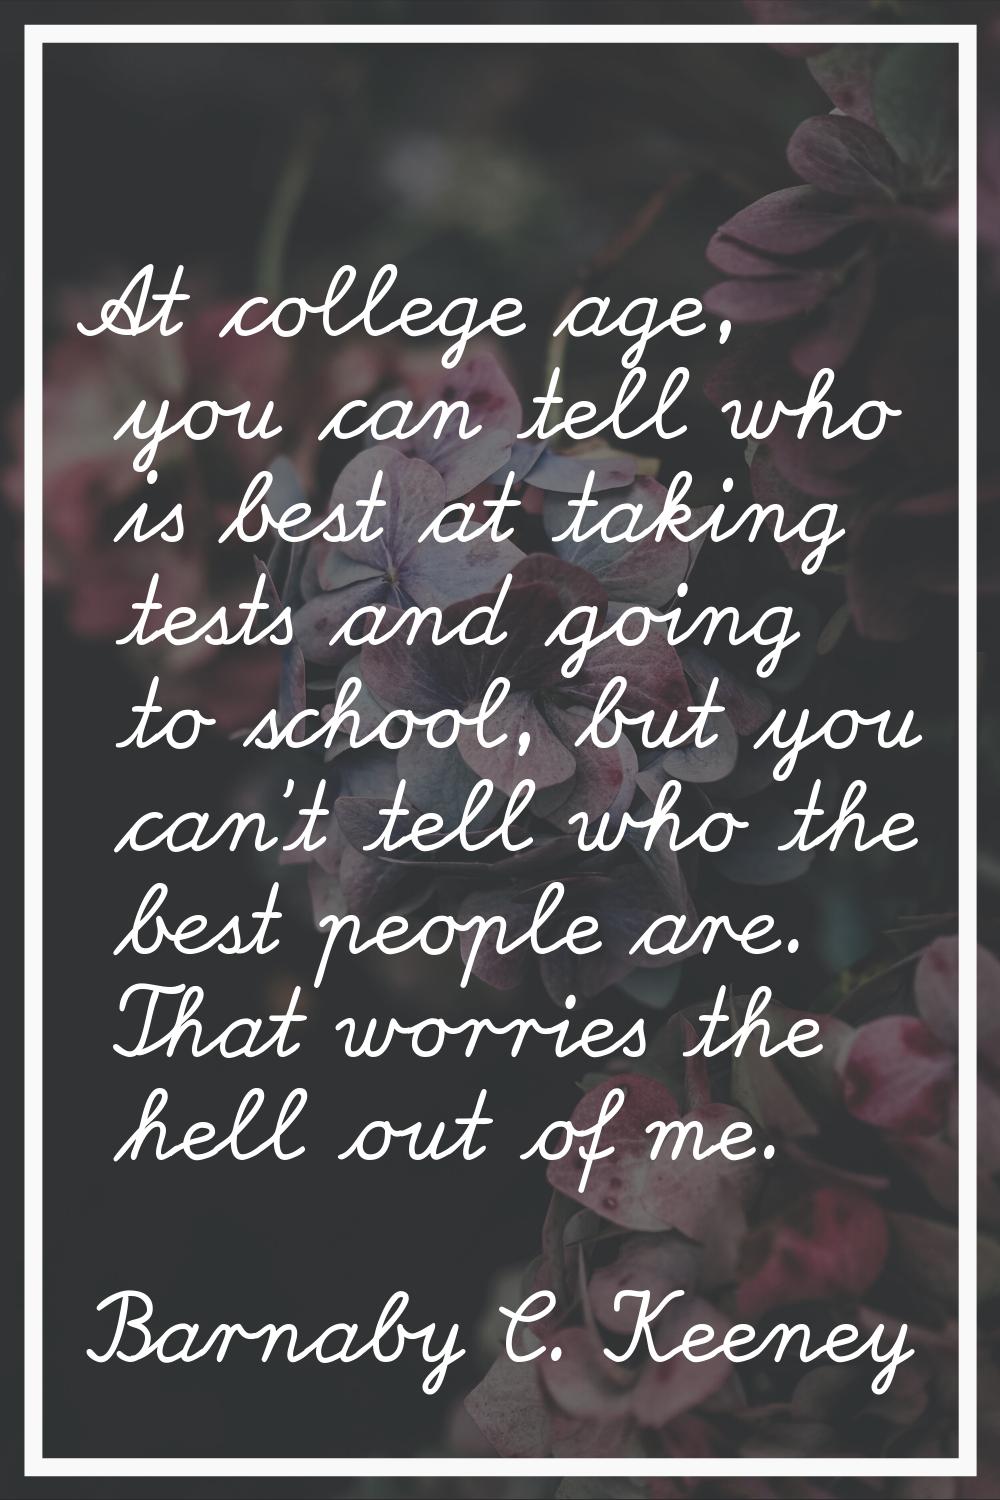 At college age, you can tell who is best at taking tests and going to school, but you can't tell wh